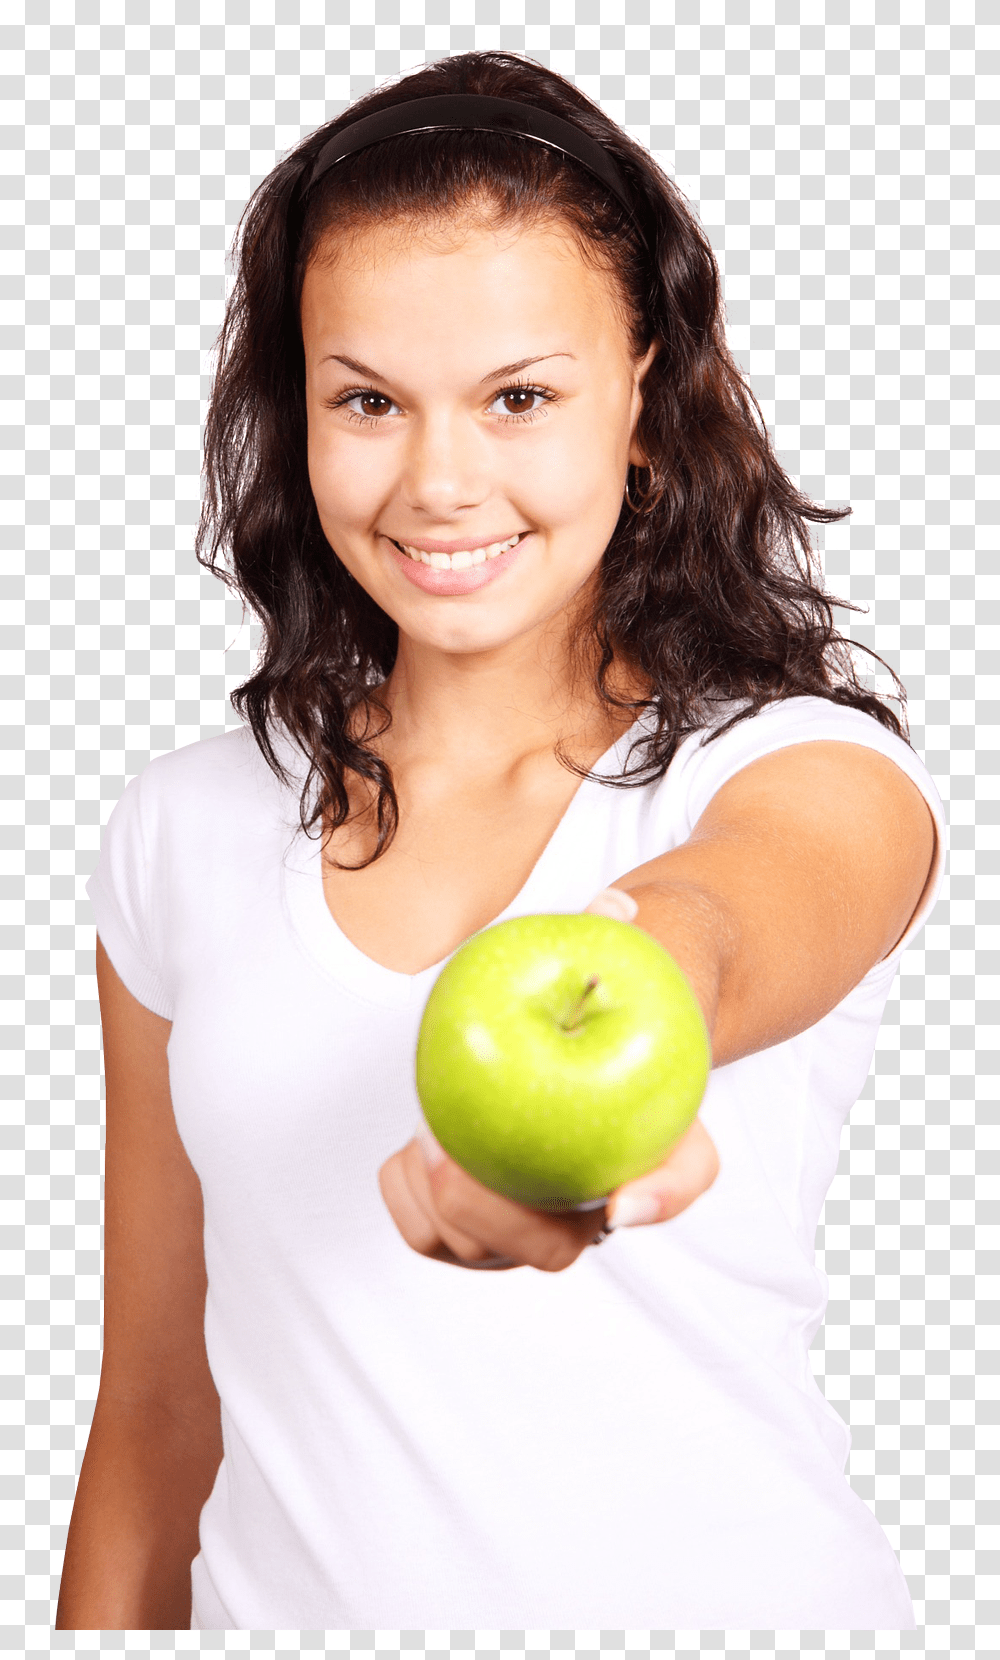 Download Girl With Green Apple Image For Free Girl Holding Apple, Plant, Person, Human, Fruit Transparent Png